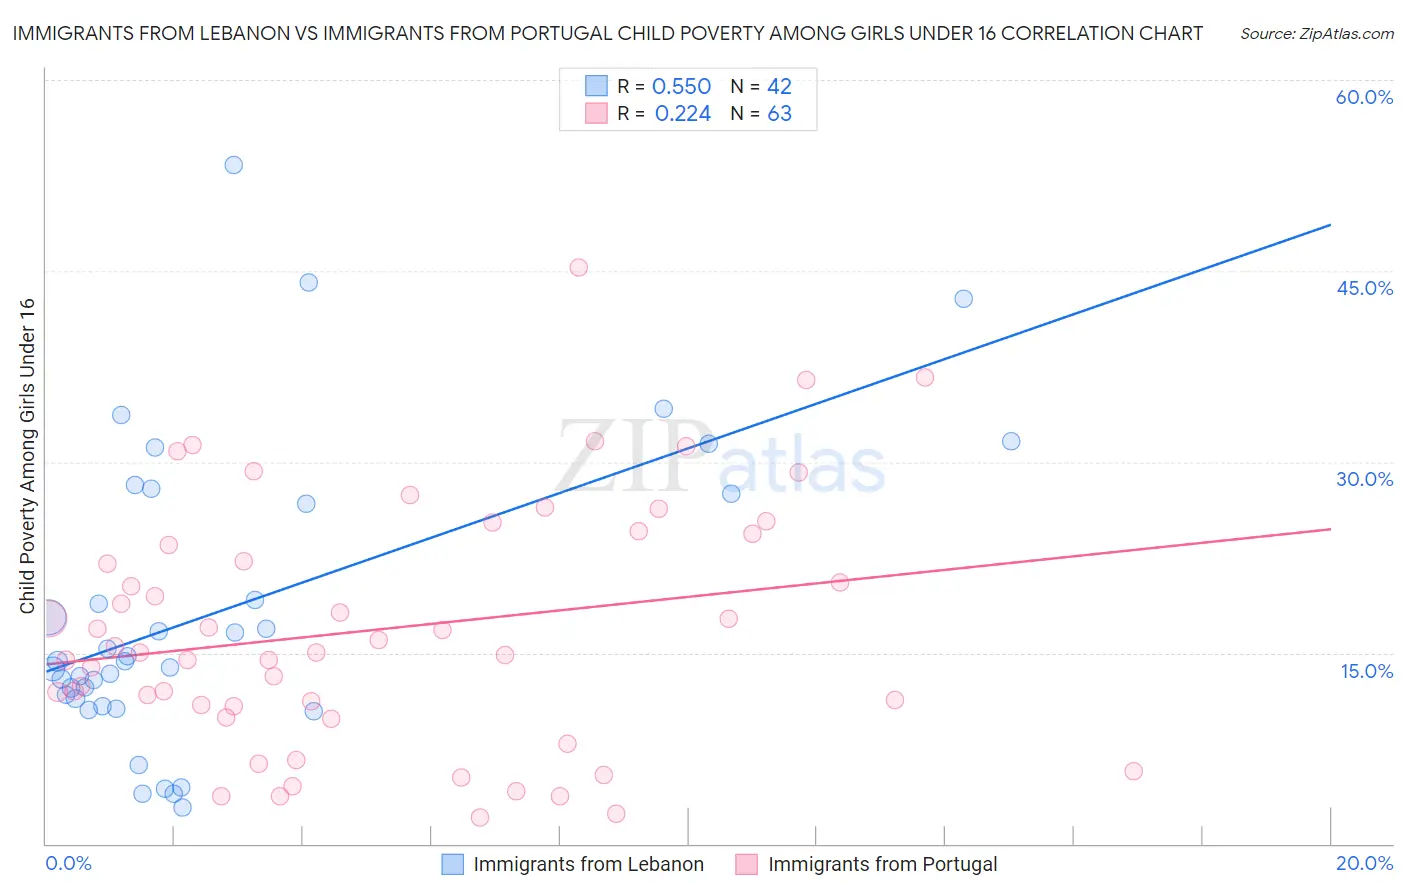 Immigrants from Lebanon vs Immigrants from Portugal Child Poverty Among Girls Under 16